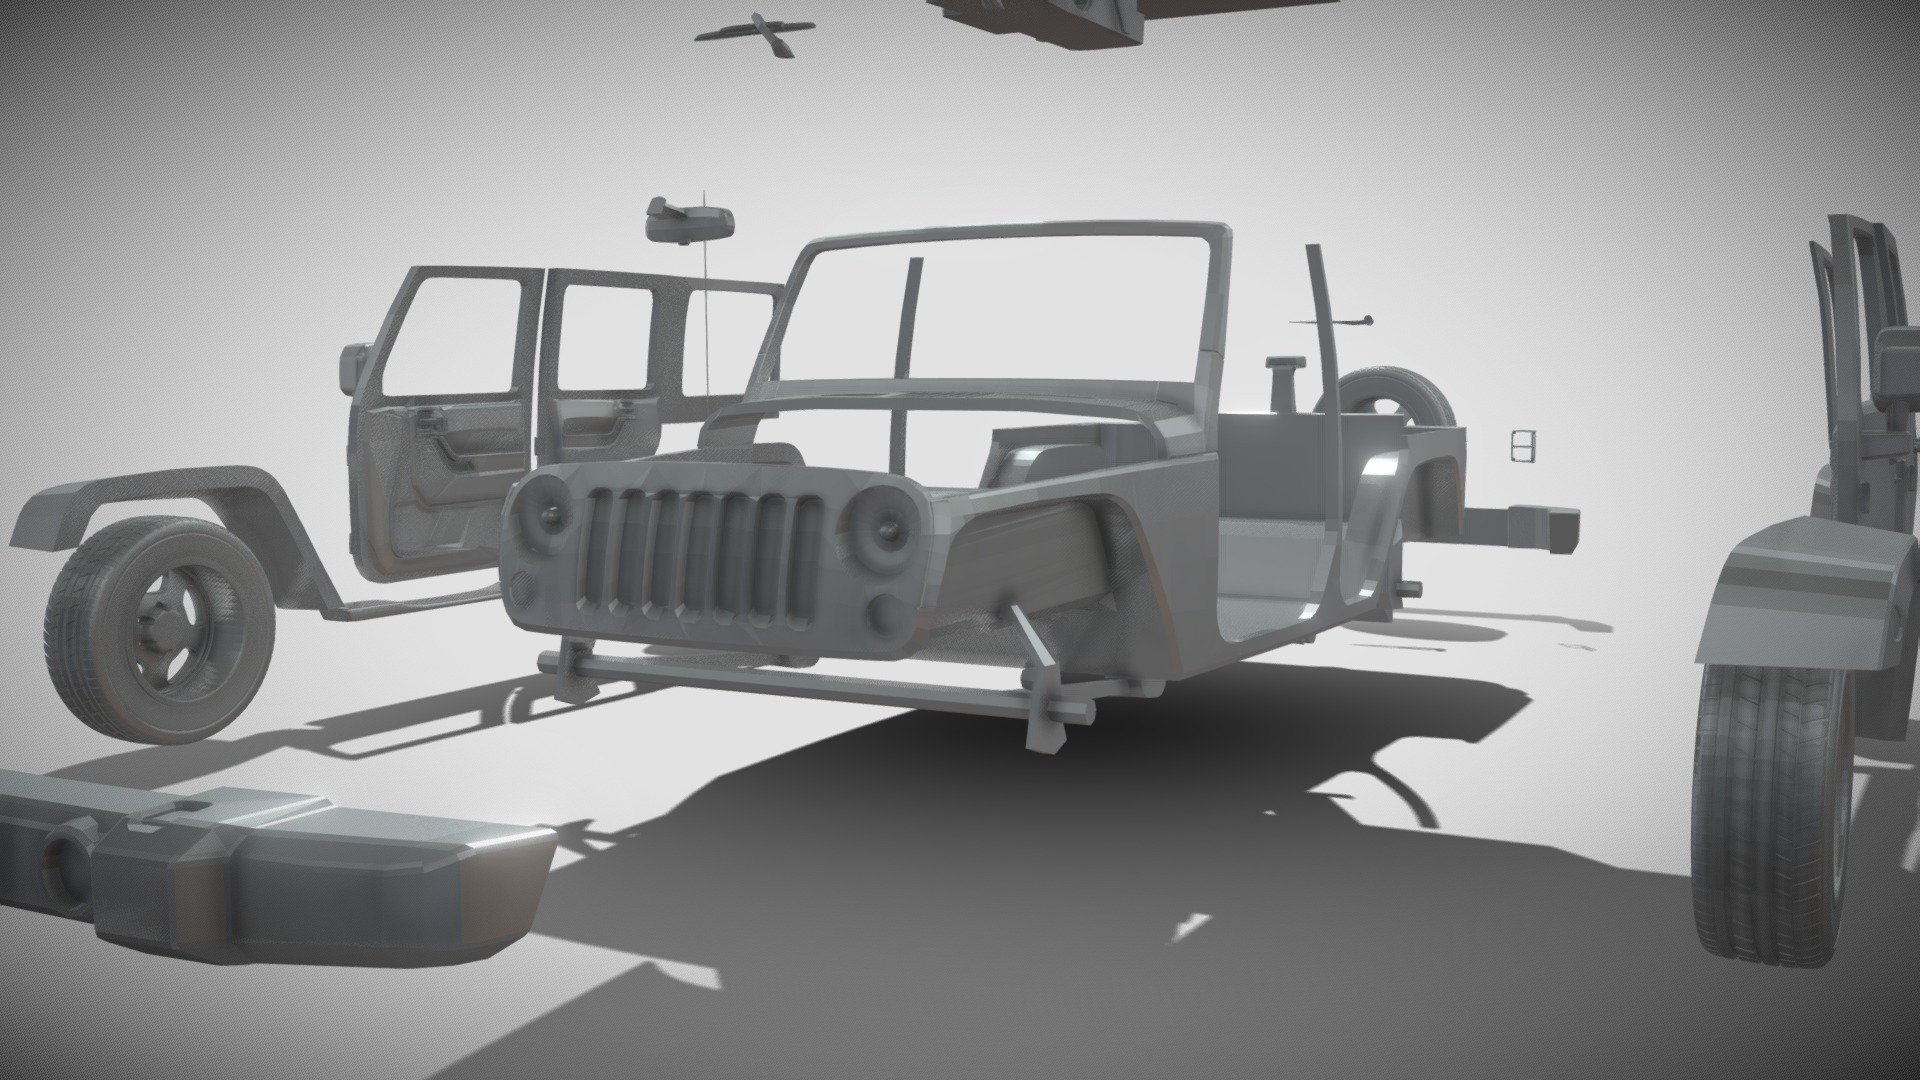 With 2 months of hardworking. We're officially announcing our first 3D Print Ready model - Jeep Wrangler with fully detailed interior as well. The animation shows the broken down parts and the way to assemble them.

default size of the model 2.5m x 3.1m, easily adjustable.
Tested on Anycubic Photon Printer

You'll need to print each part seprately and then assemble them the way it shows. Window glass can be made and provided as per customer request 3d model